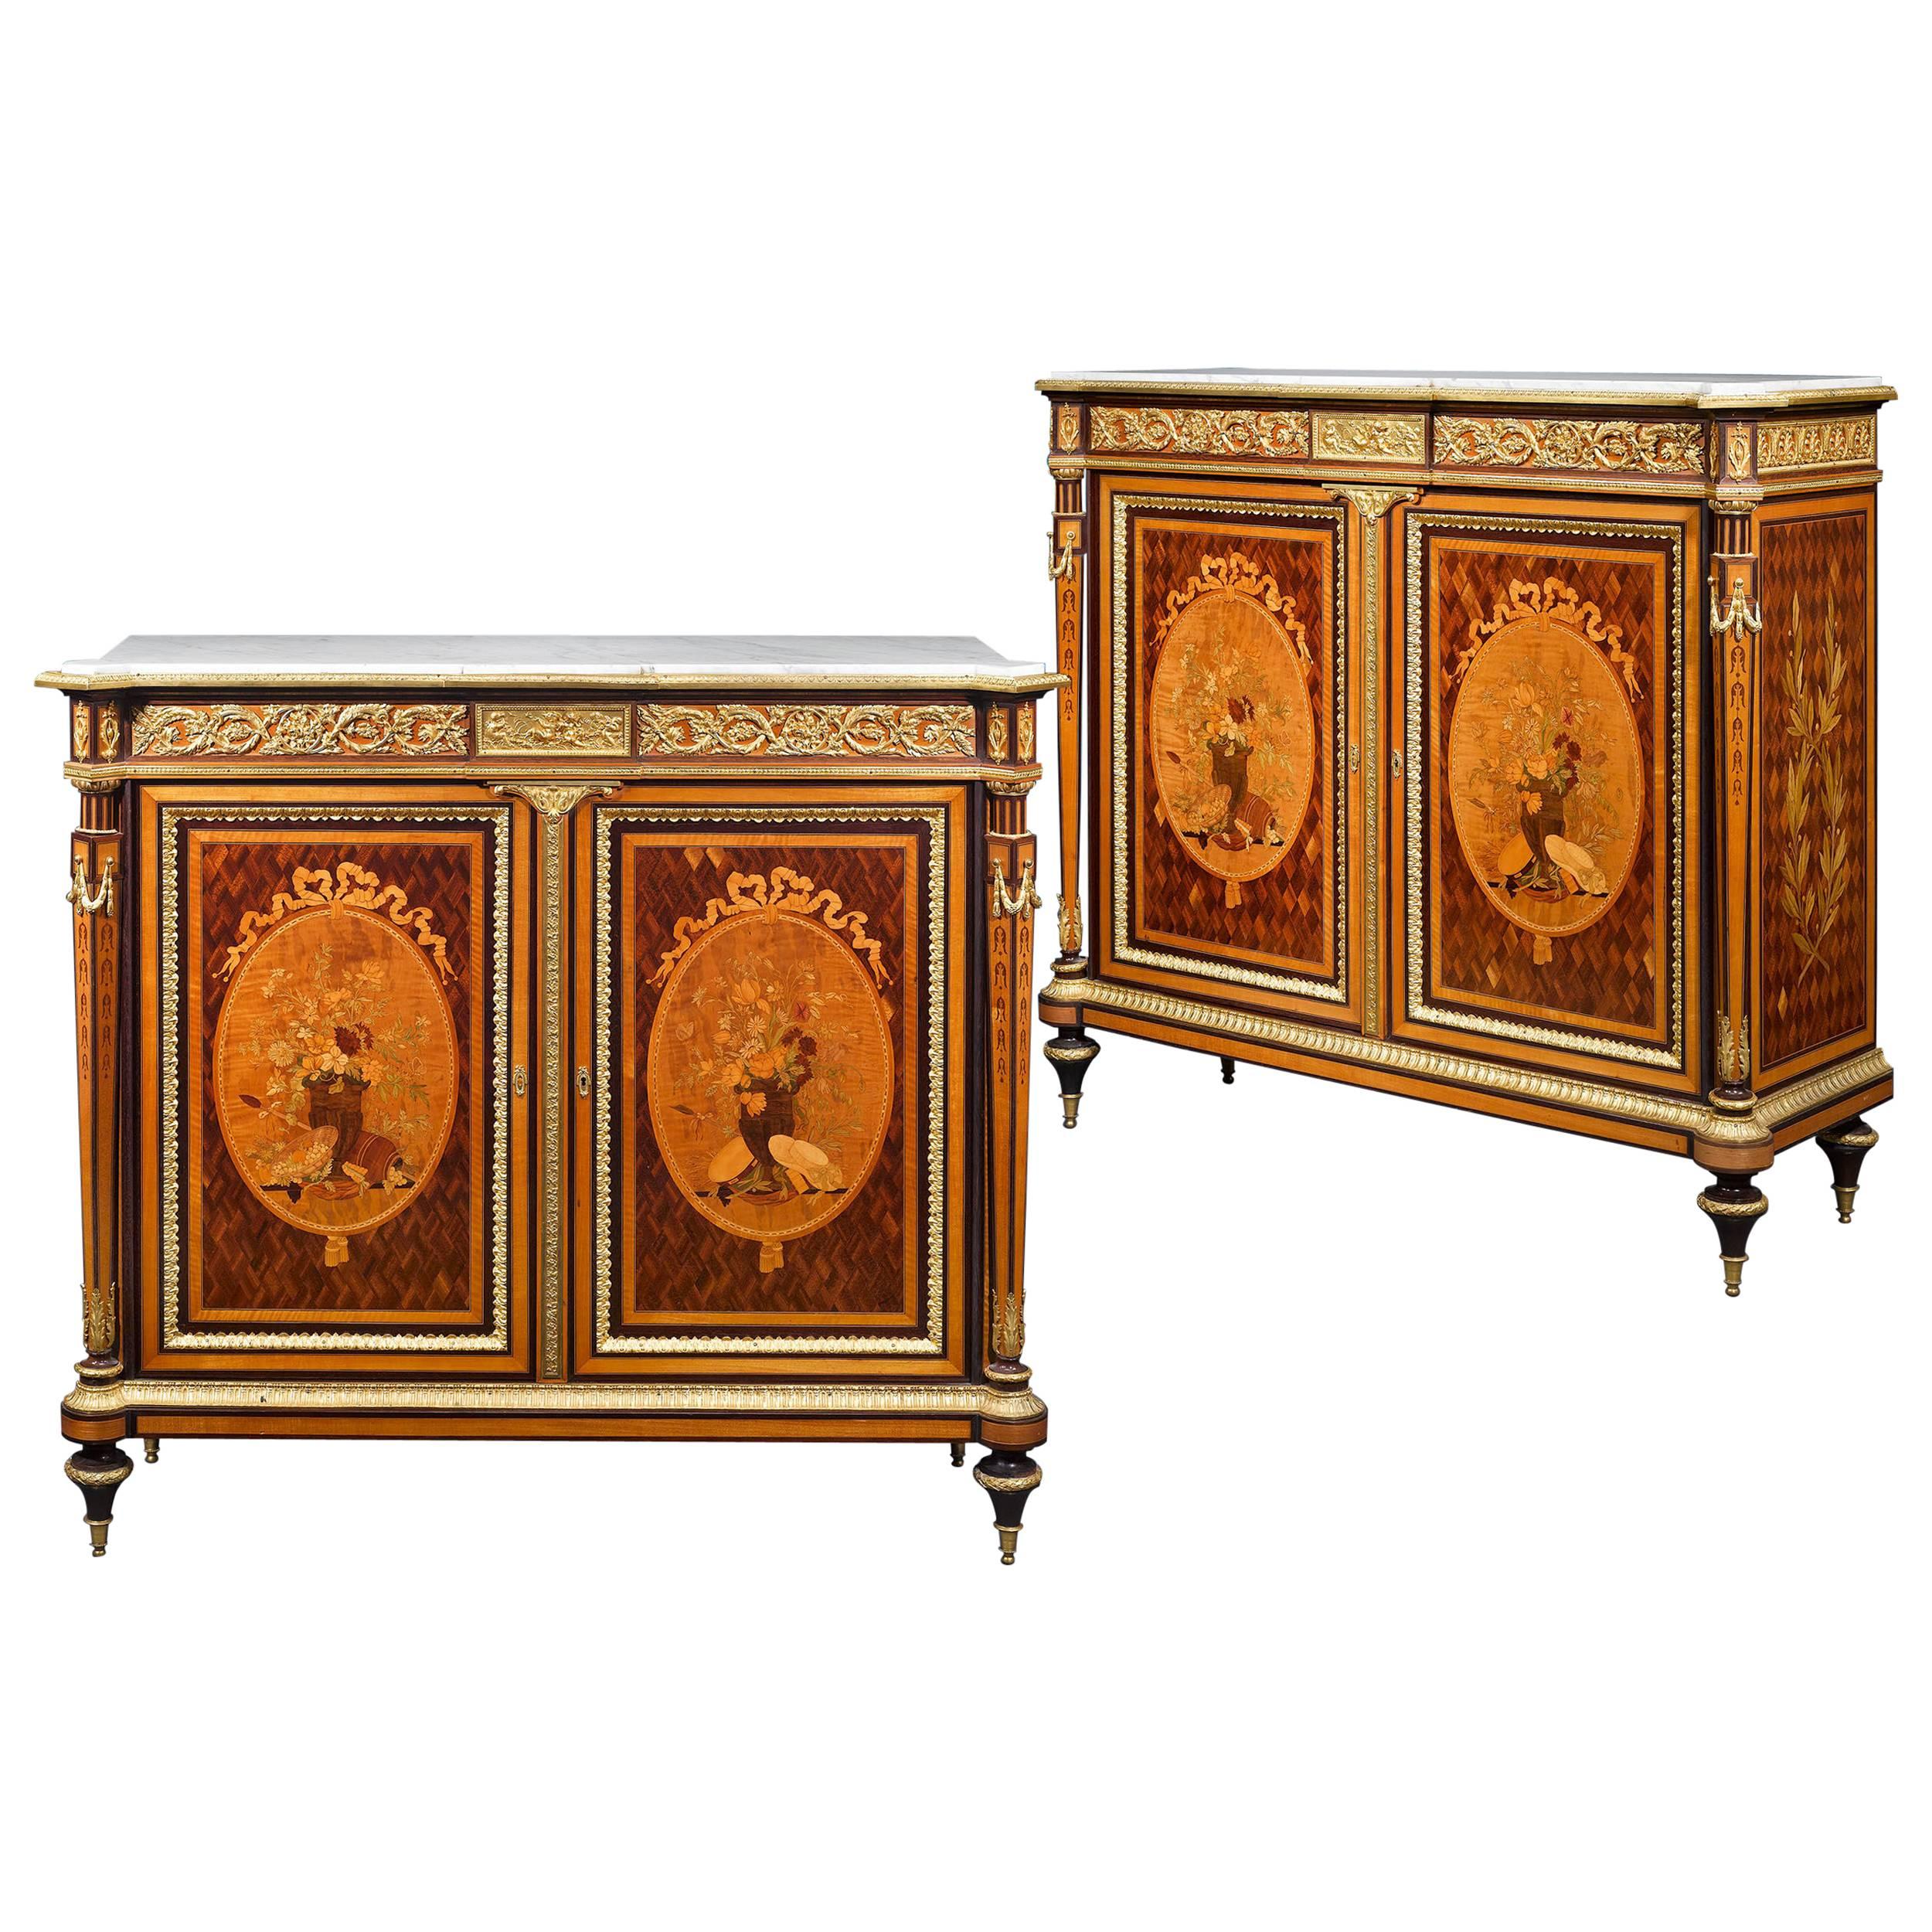 Exceptional Inlaid Cabinets Attributed to Victor Paillard